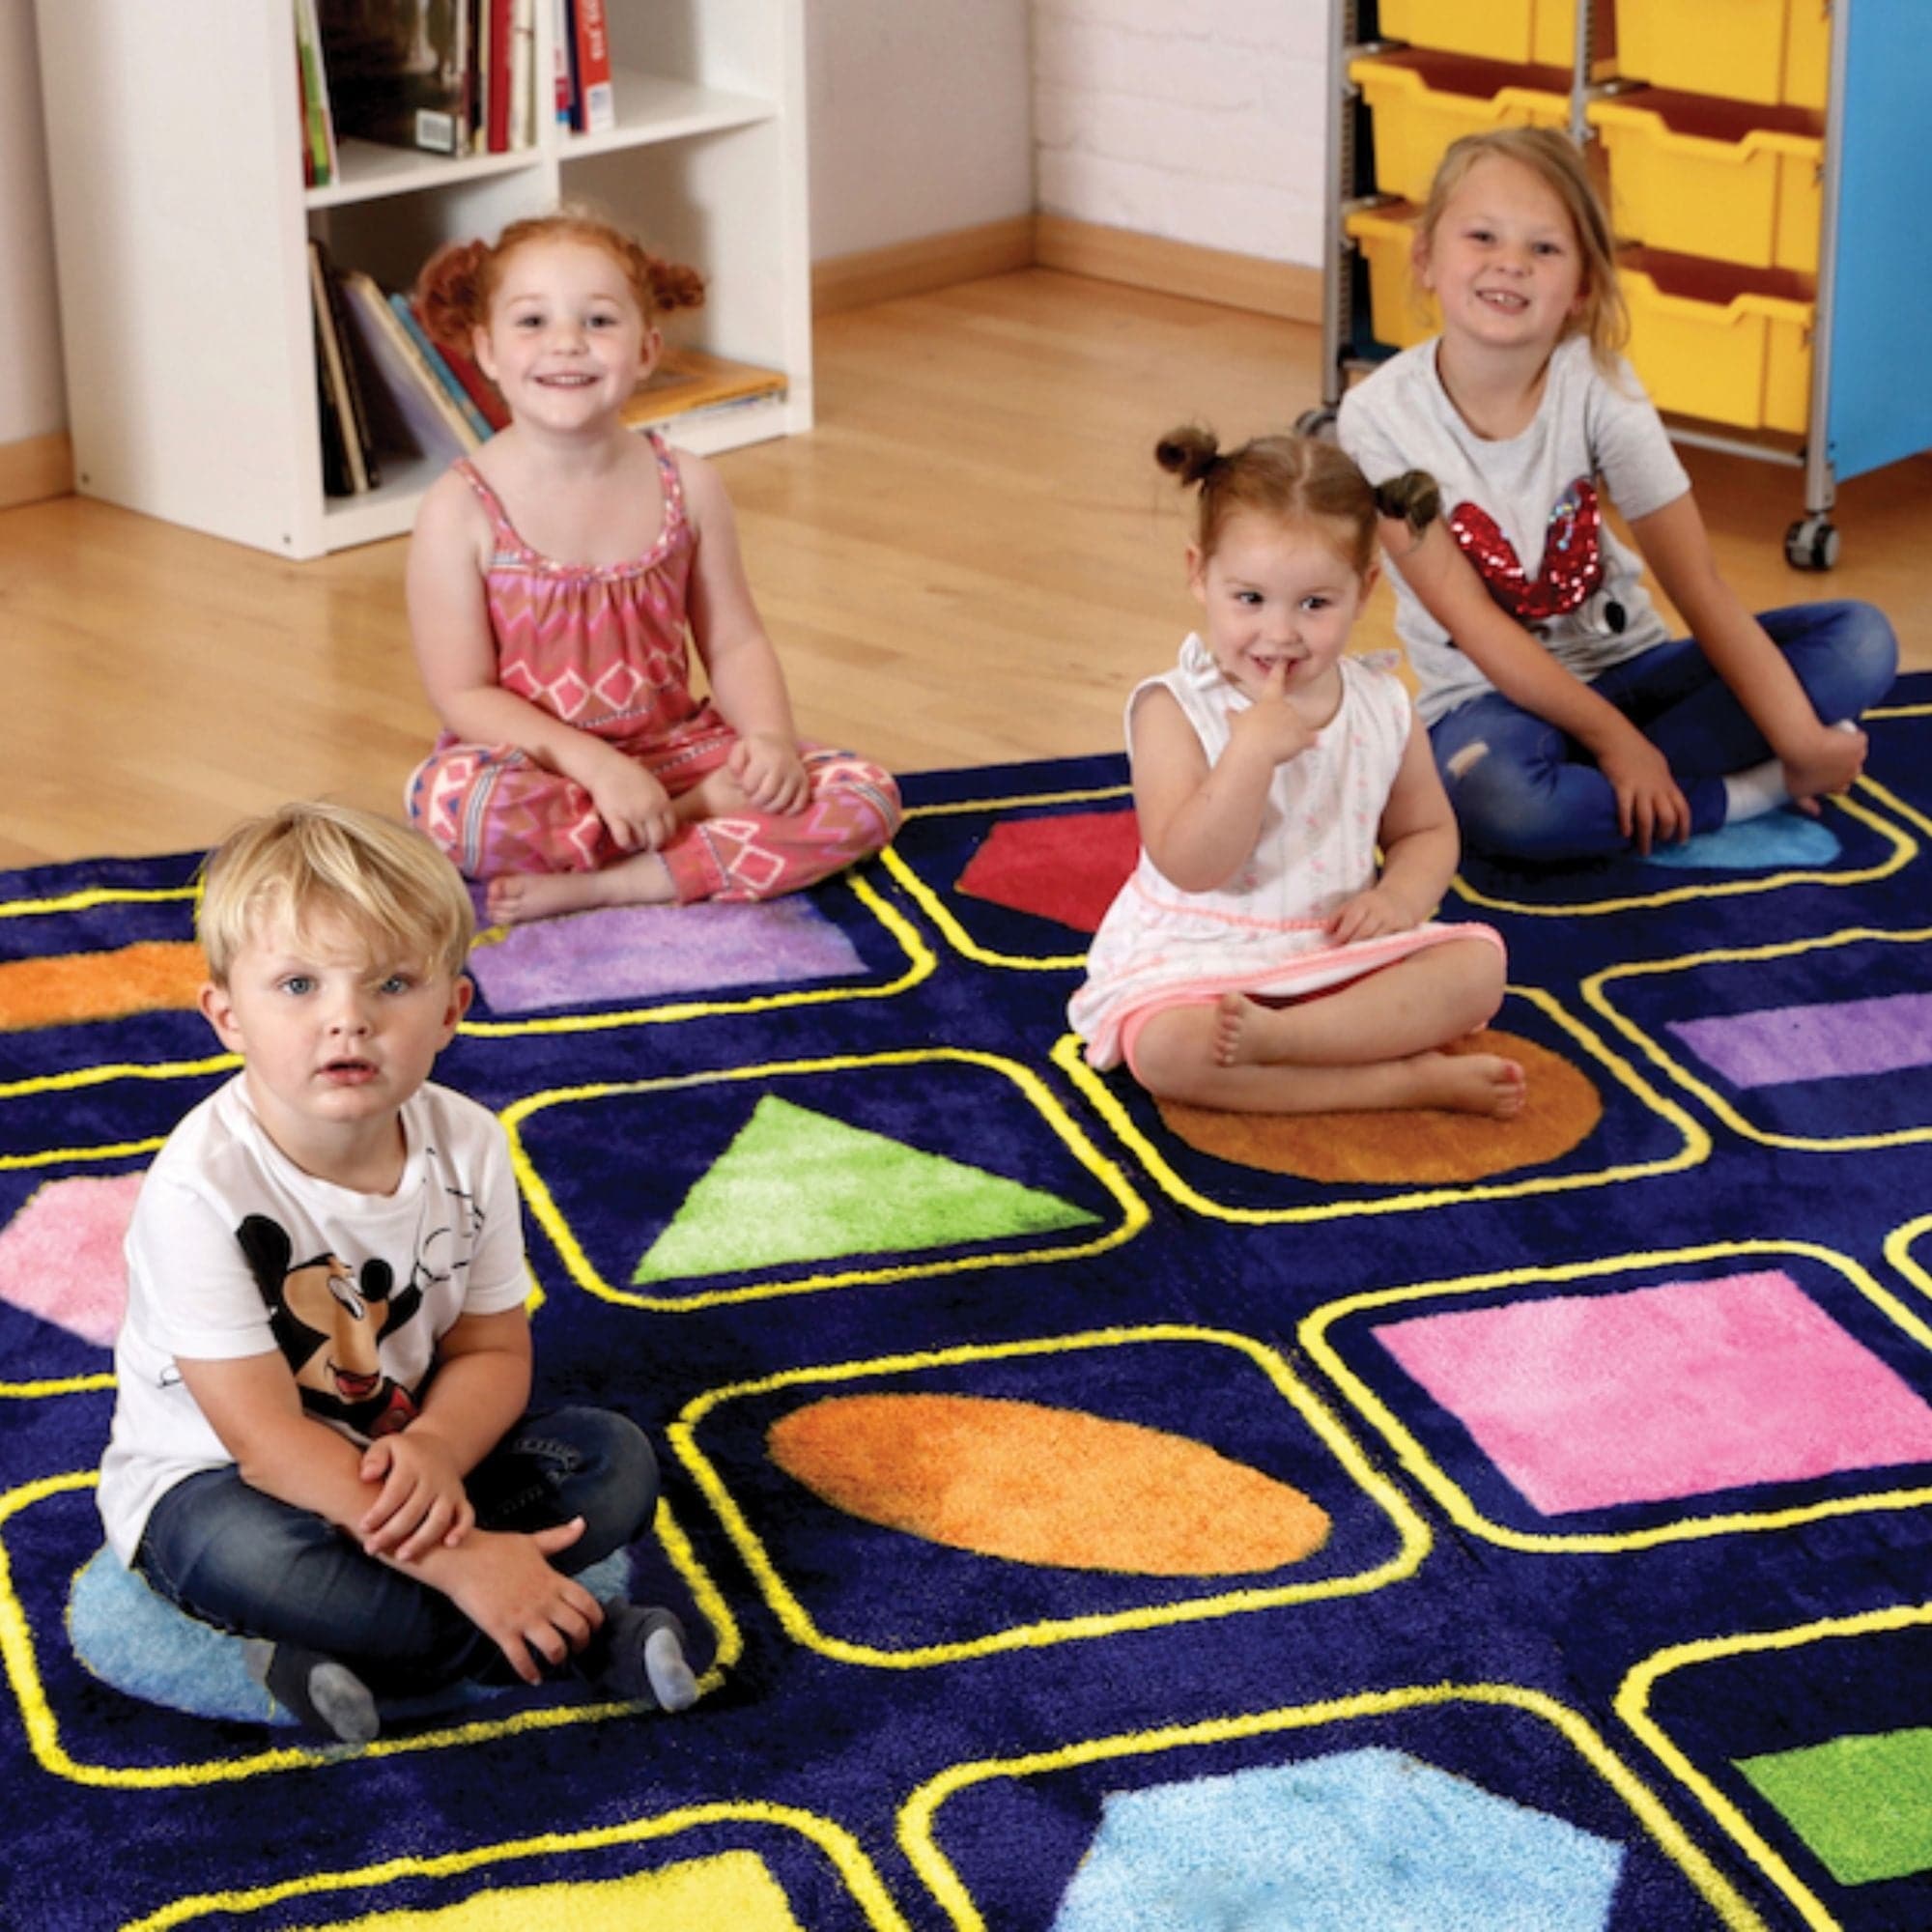 Kindercolour Geometric Shapes Carpet 3 X 3 Metre, The Kindercolour™Geometric Shapes Carpet is a huge 3m square placement carpet with clearly recognisable seating areas for up to 30 children. These brightly coloured basic shapes aid shape and pattern identification. Heavy duty Dura-Pile™, substantial premium quality carpet, with an extra thick pile. Soft textured, tufted Nylon twist pile, designed specifically for comfort and longevity. Ideal for early years and primary school learning environments. Tightly 